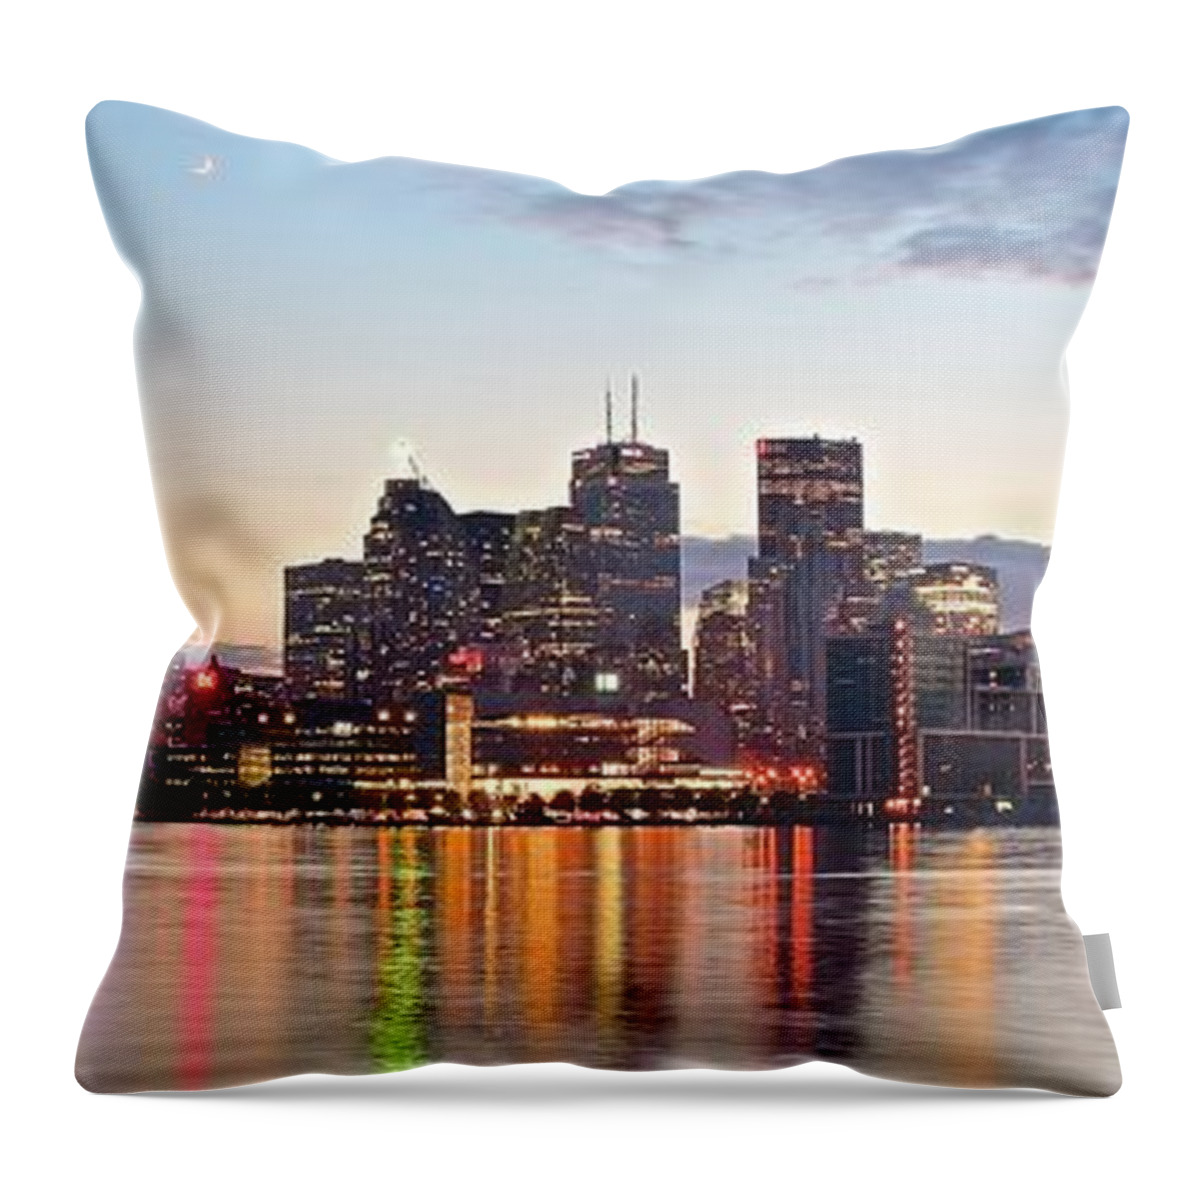 Toronto Throw Pillow featuring the photograph Toronto Wide Angle by Frozen in Time Fine Art Photography